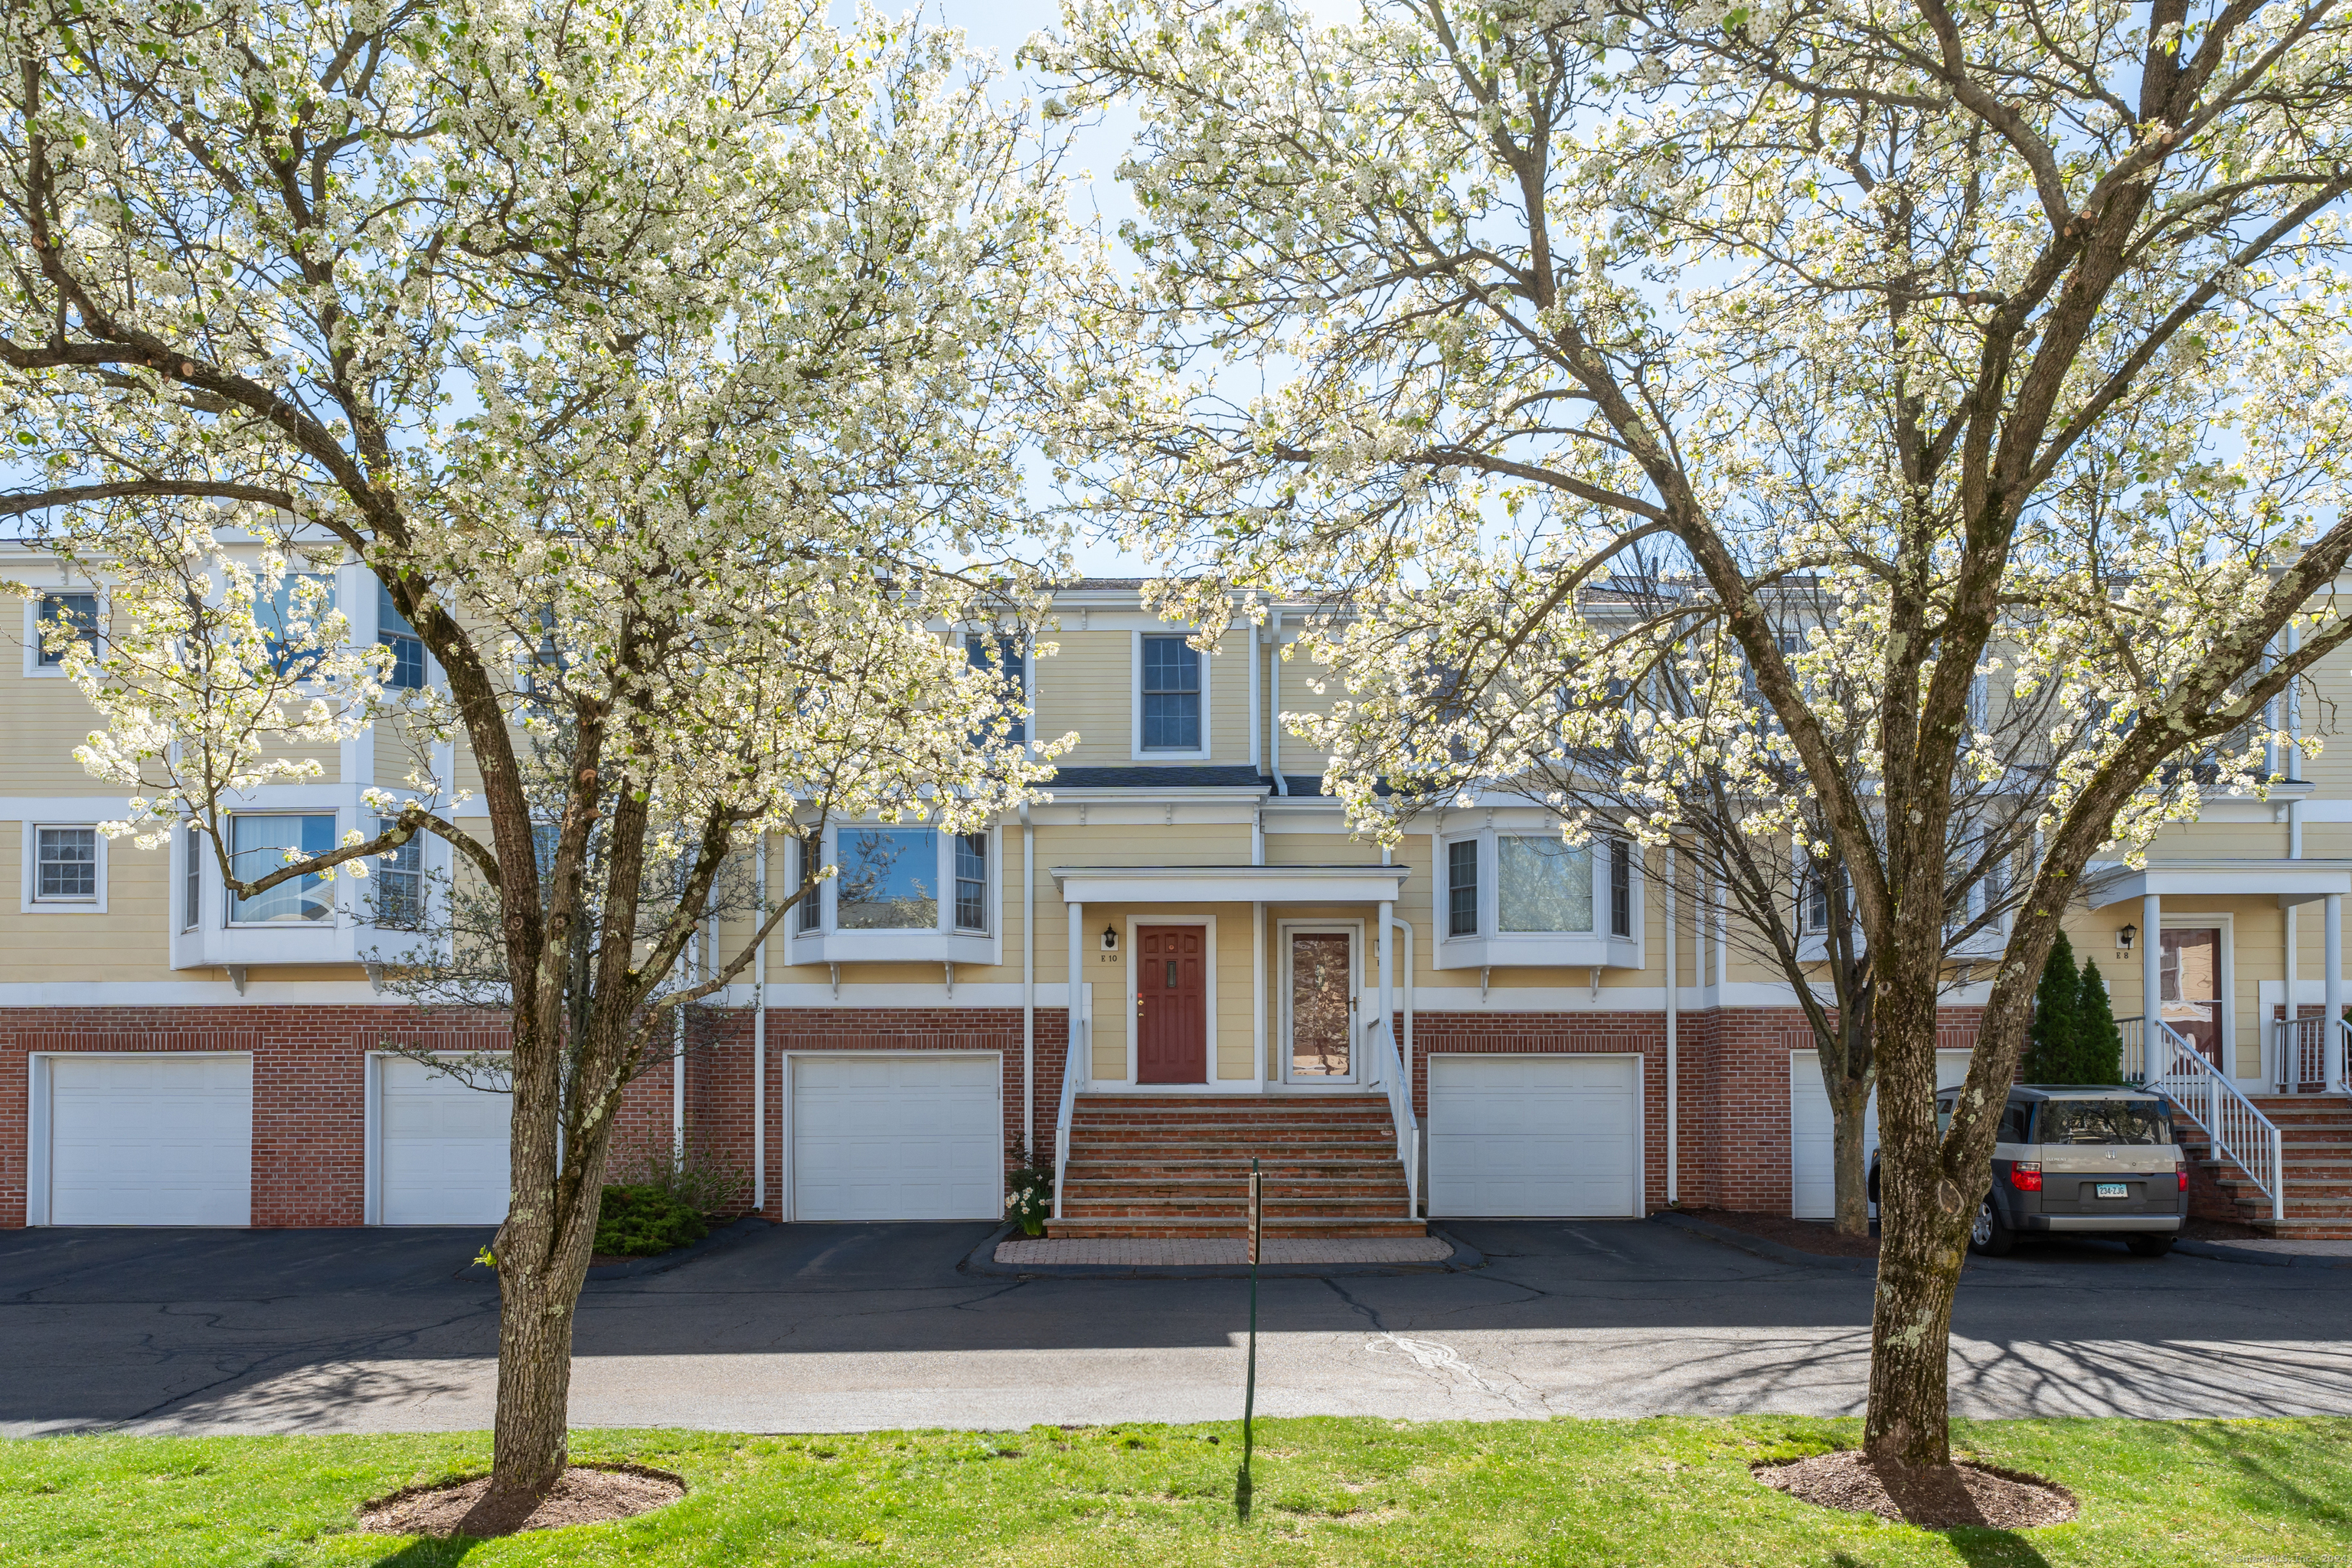 Property for Sale at 11 Saint John Street E10, North Haven, Connecticut - Bedrooms: 2 
Bathrooms: 3 
Rooms: 4  - $320,000